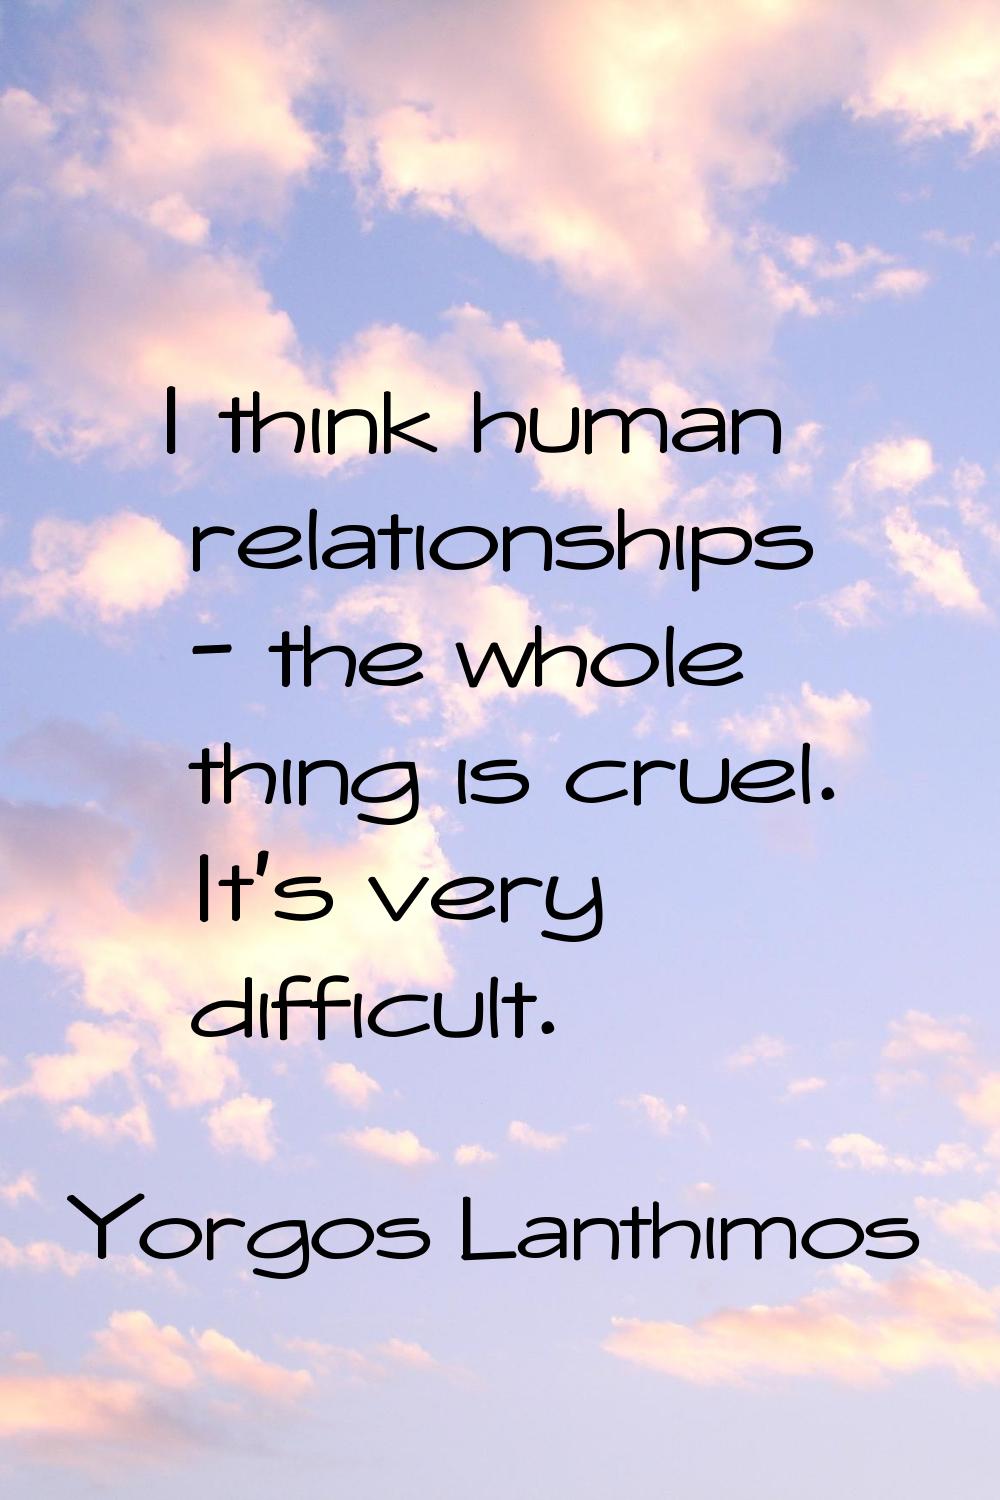 I think human relationships - the whole thing is cruel. It's very difficult.